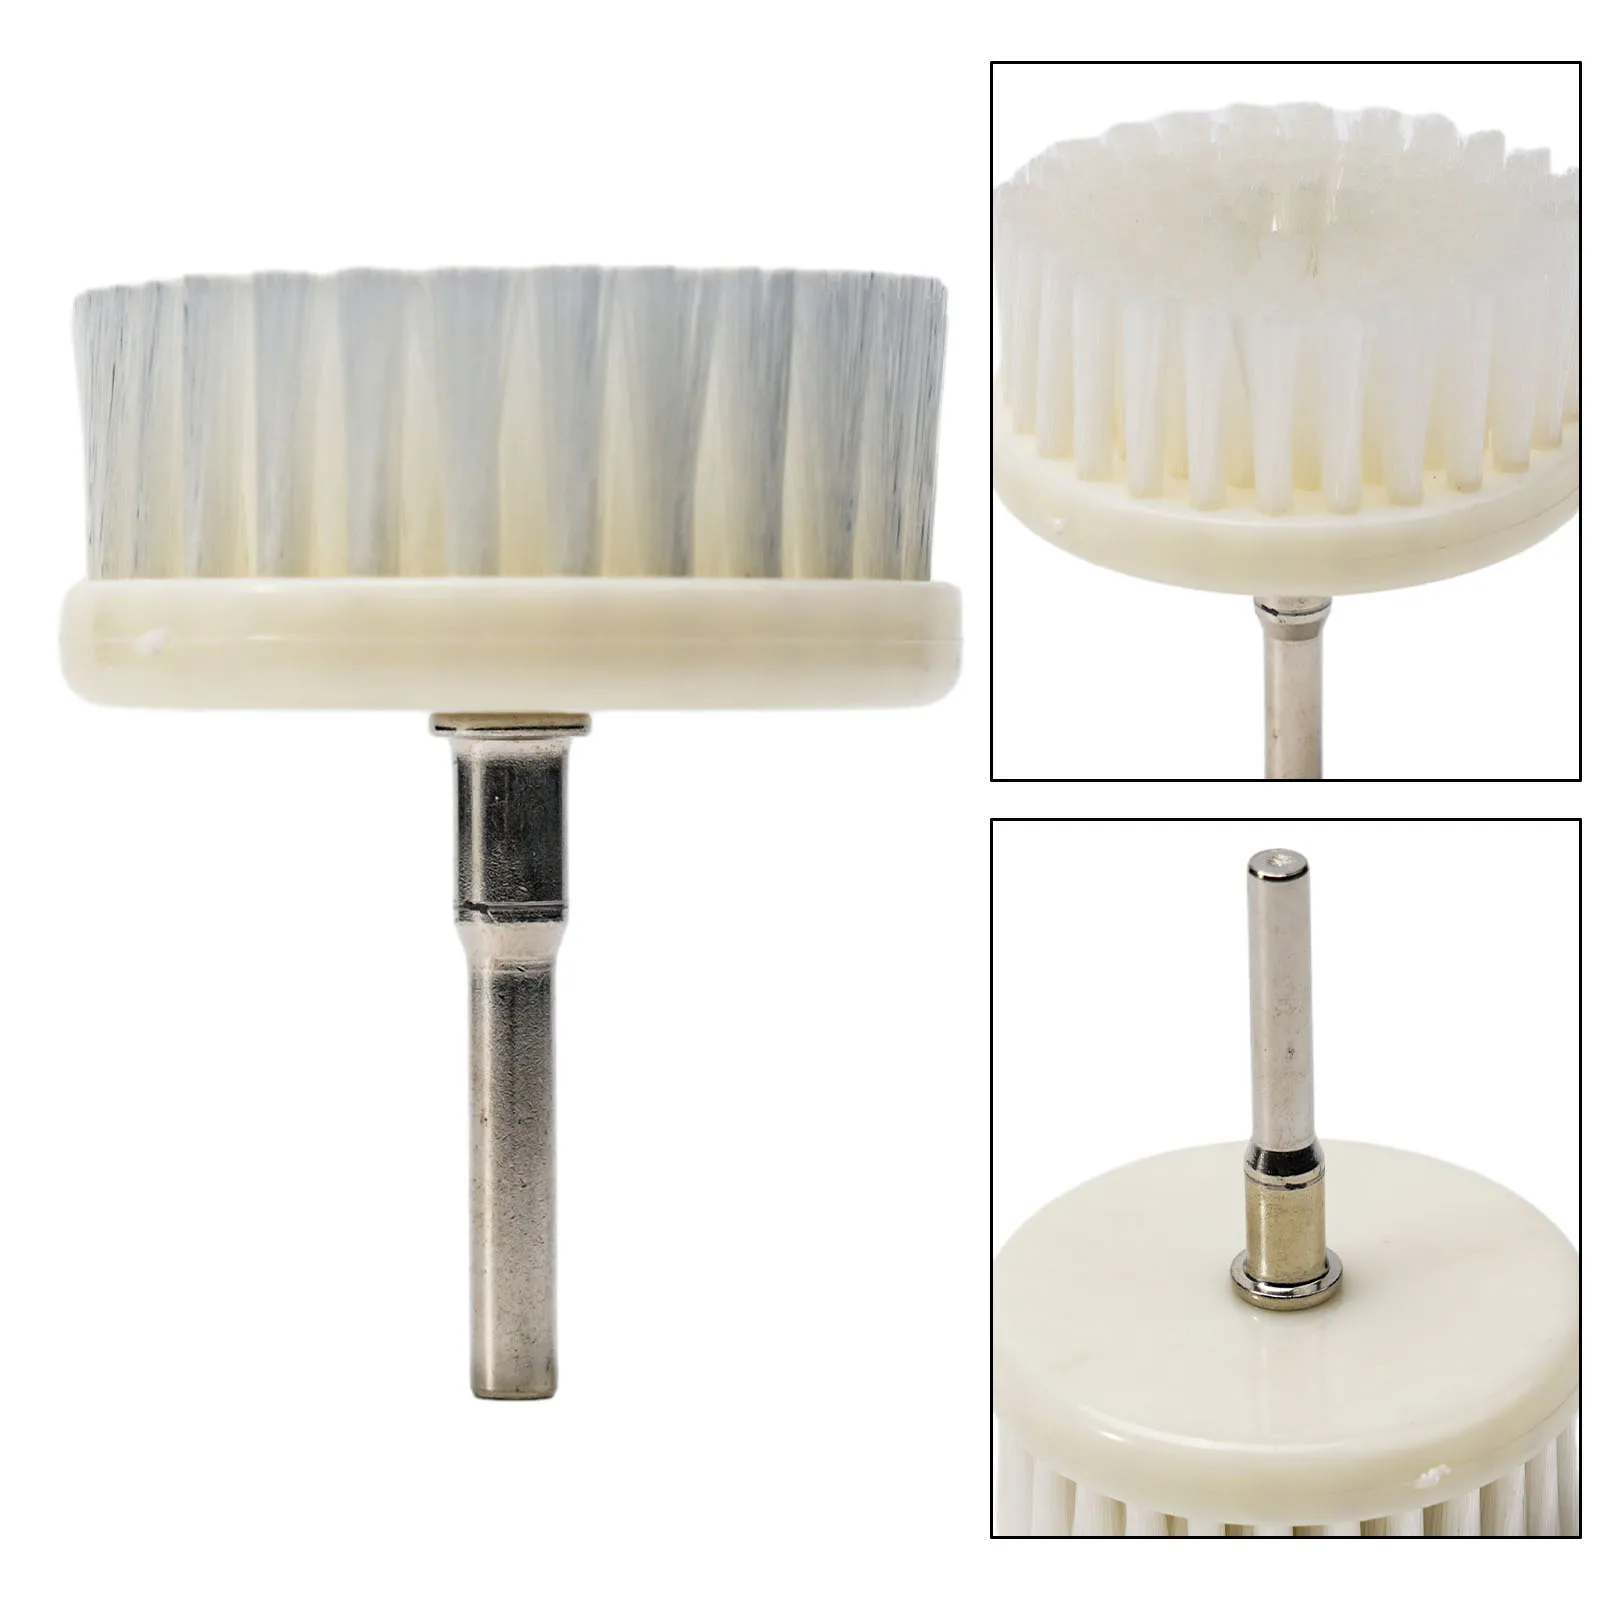 

60mm White Soft Drill Powered Brush Head For Cleaning Car Carpet Bath Surface Cleaning Of Fabric Sofa Carpet Leather Interior